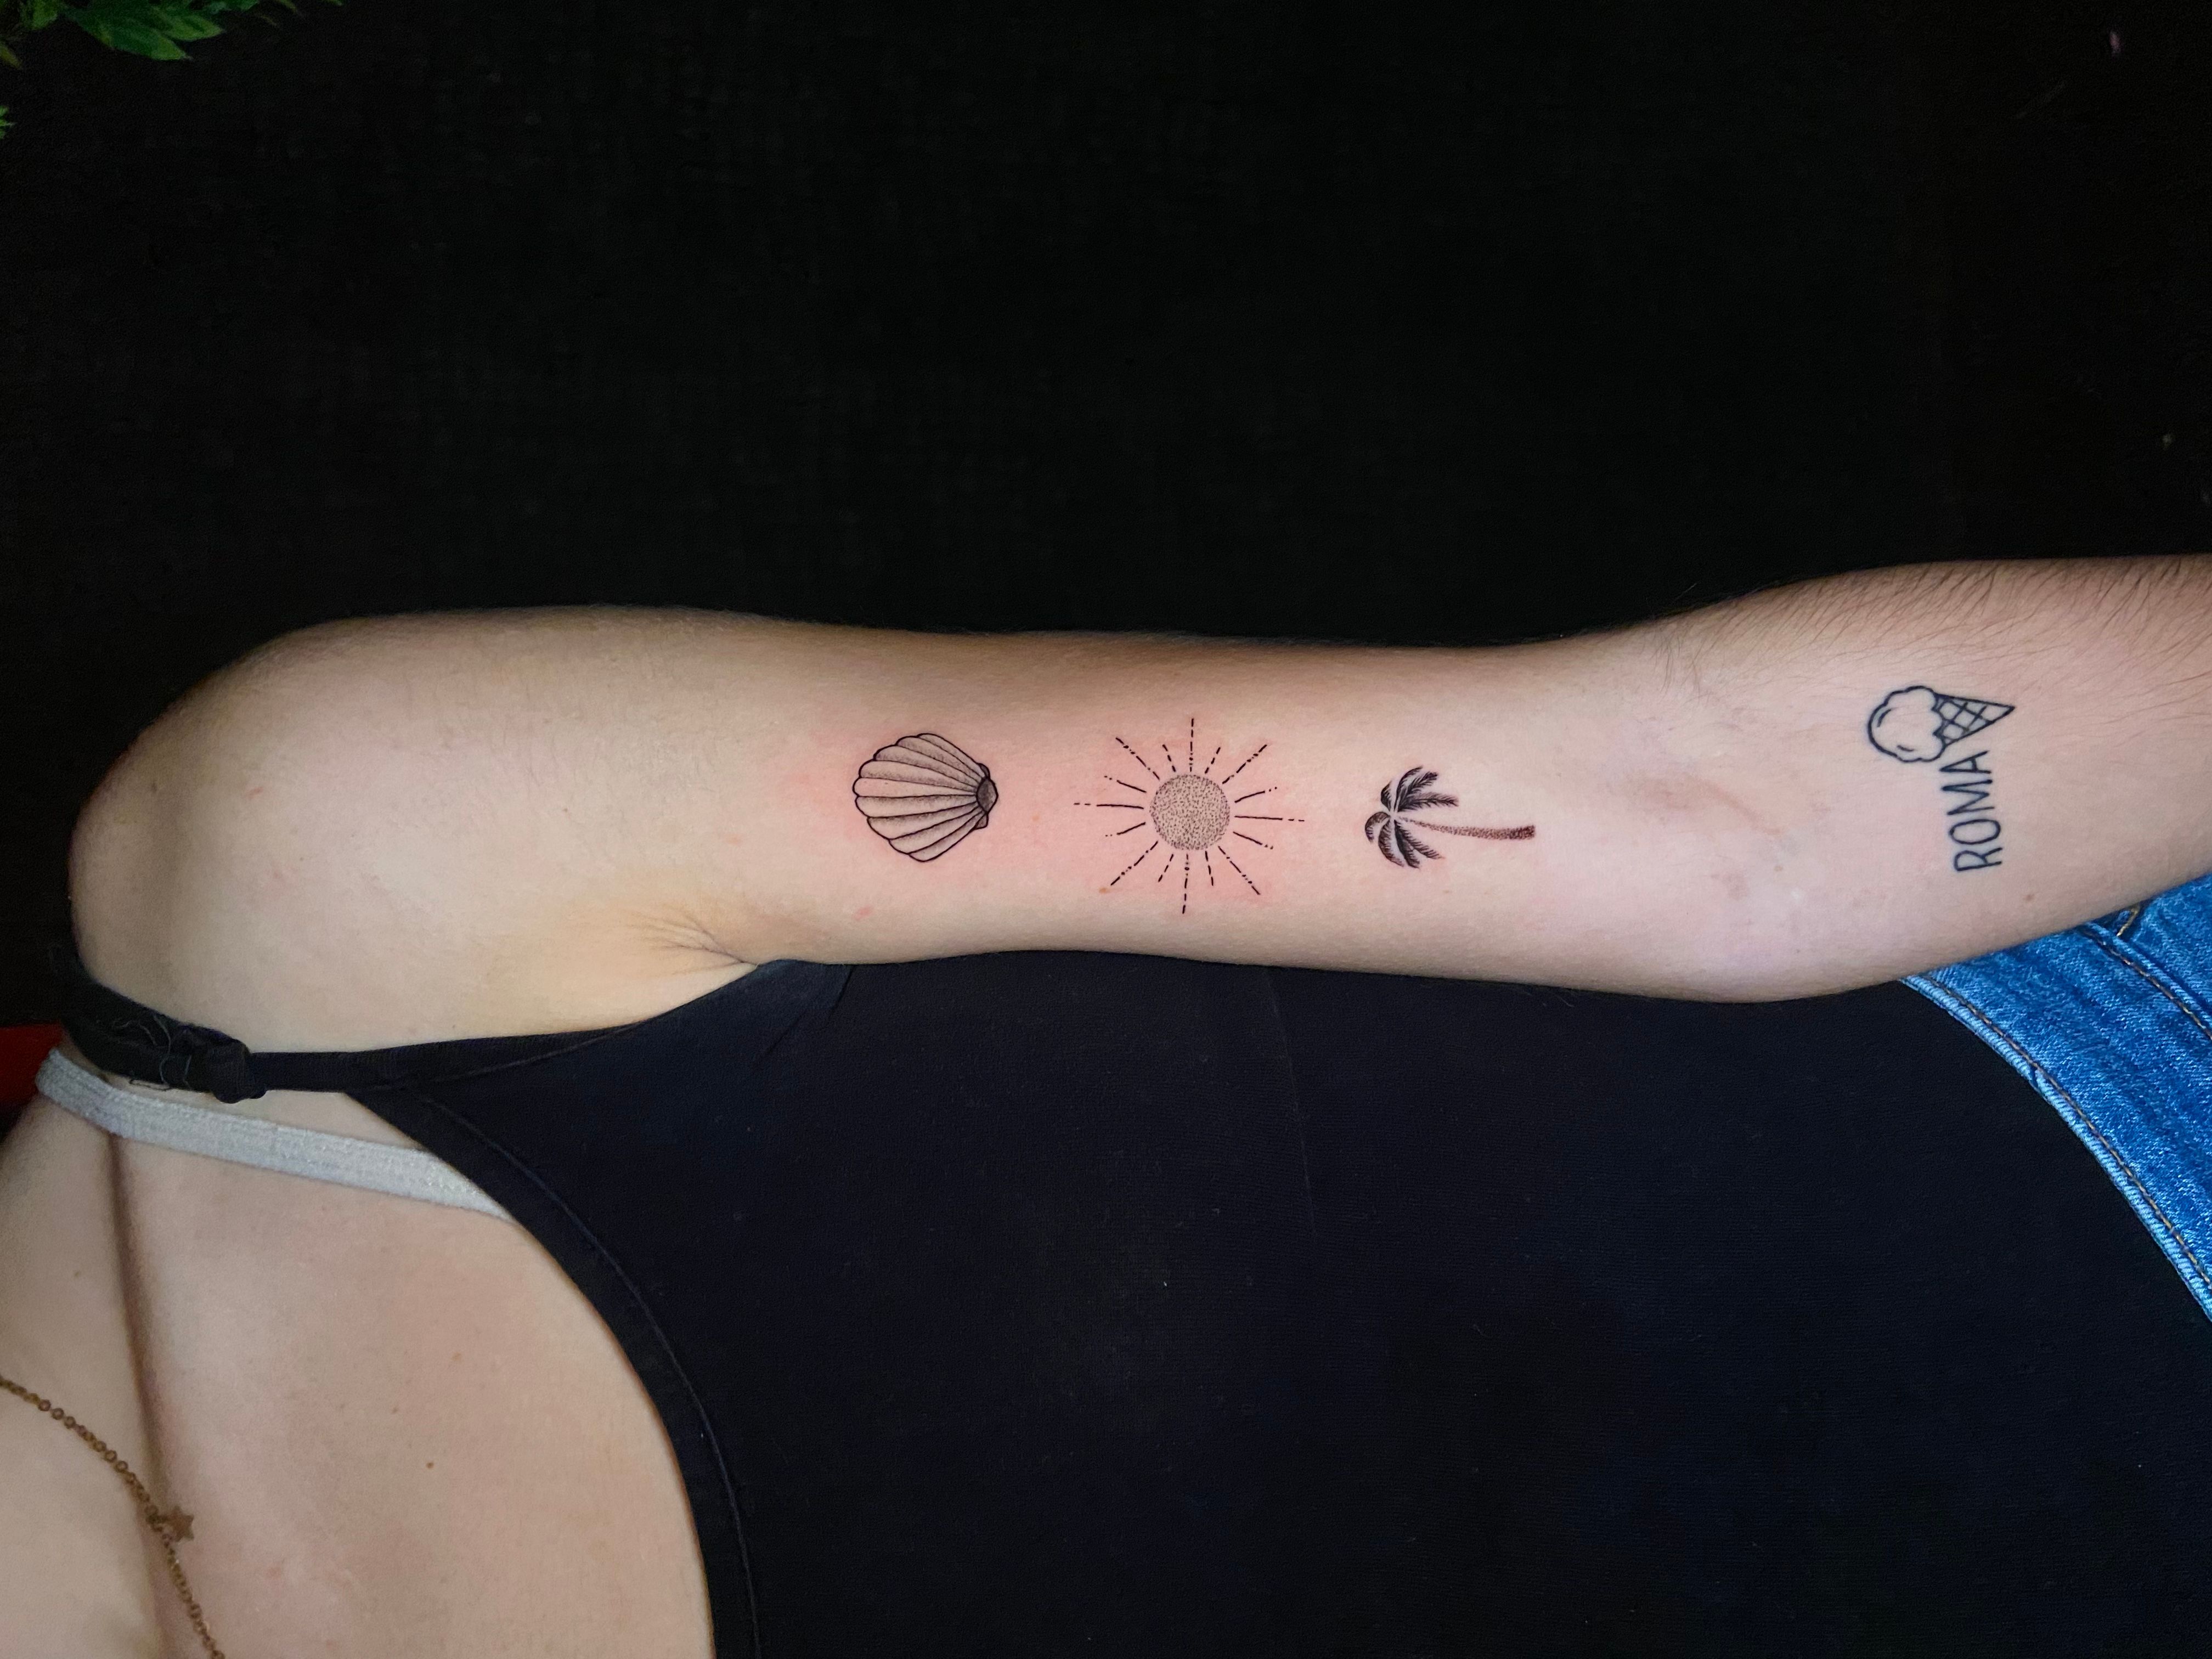 Four seasons tattoo on the left forearm | Tattoos with meaning, Tattoo  designs and meanings, Inspirational tattoos